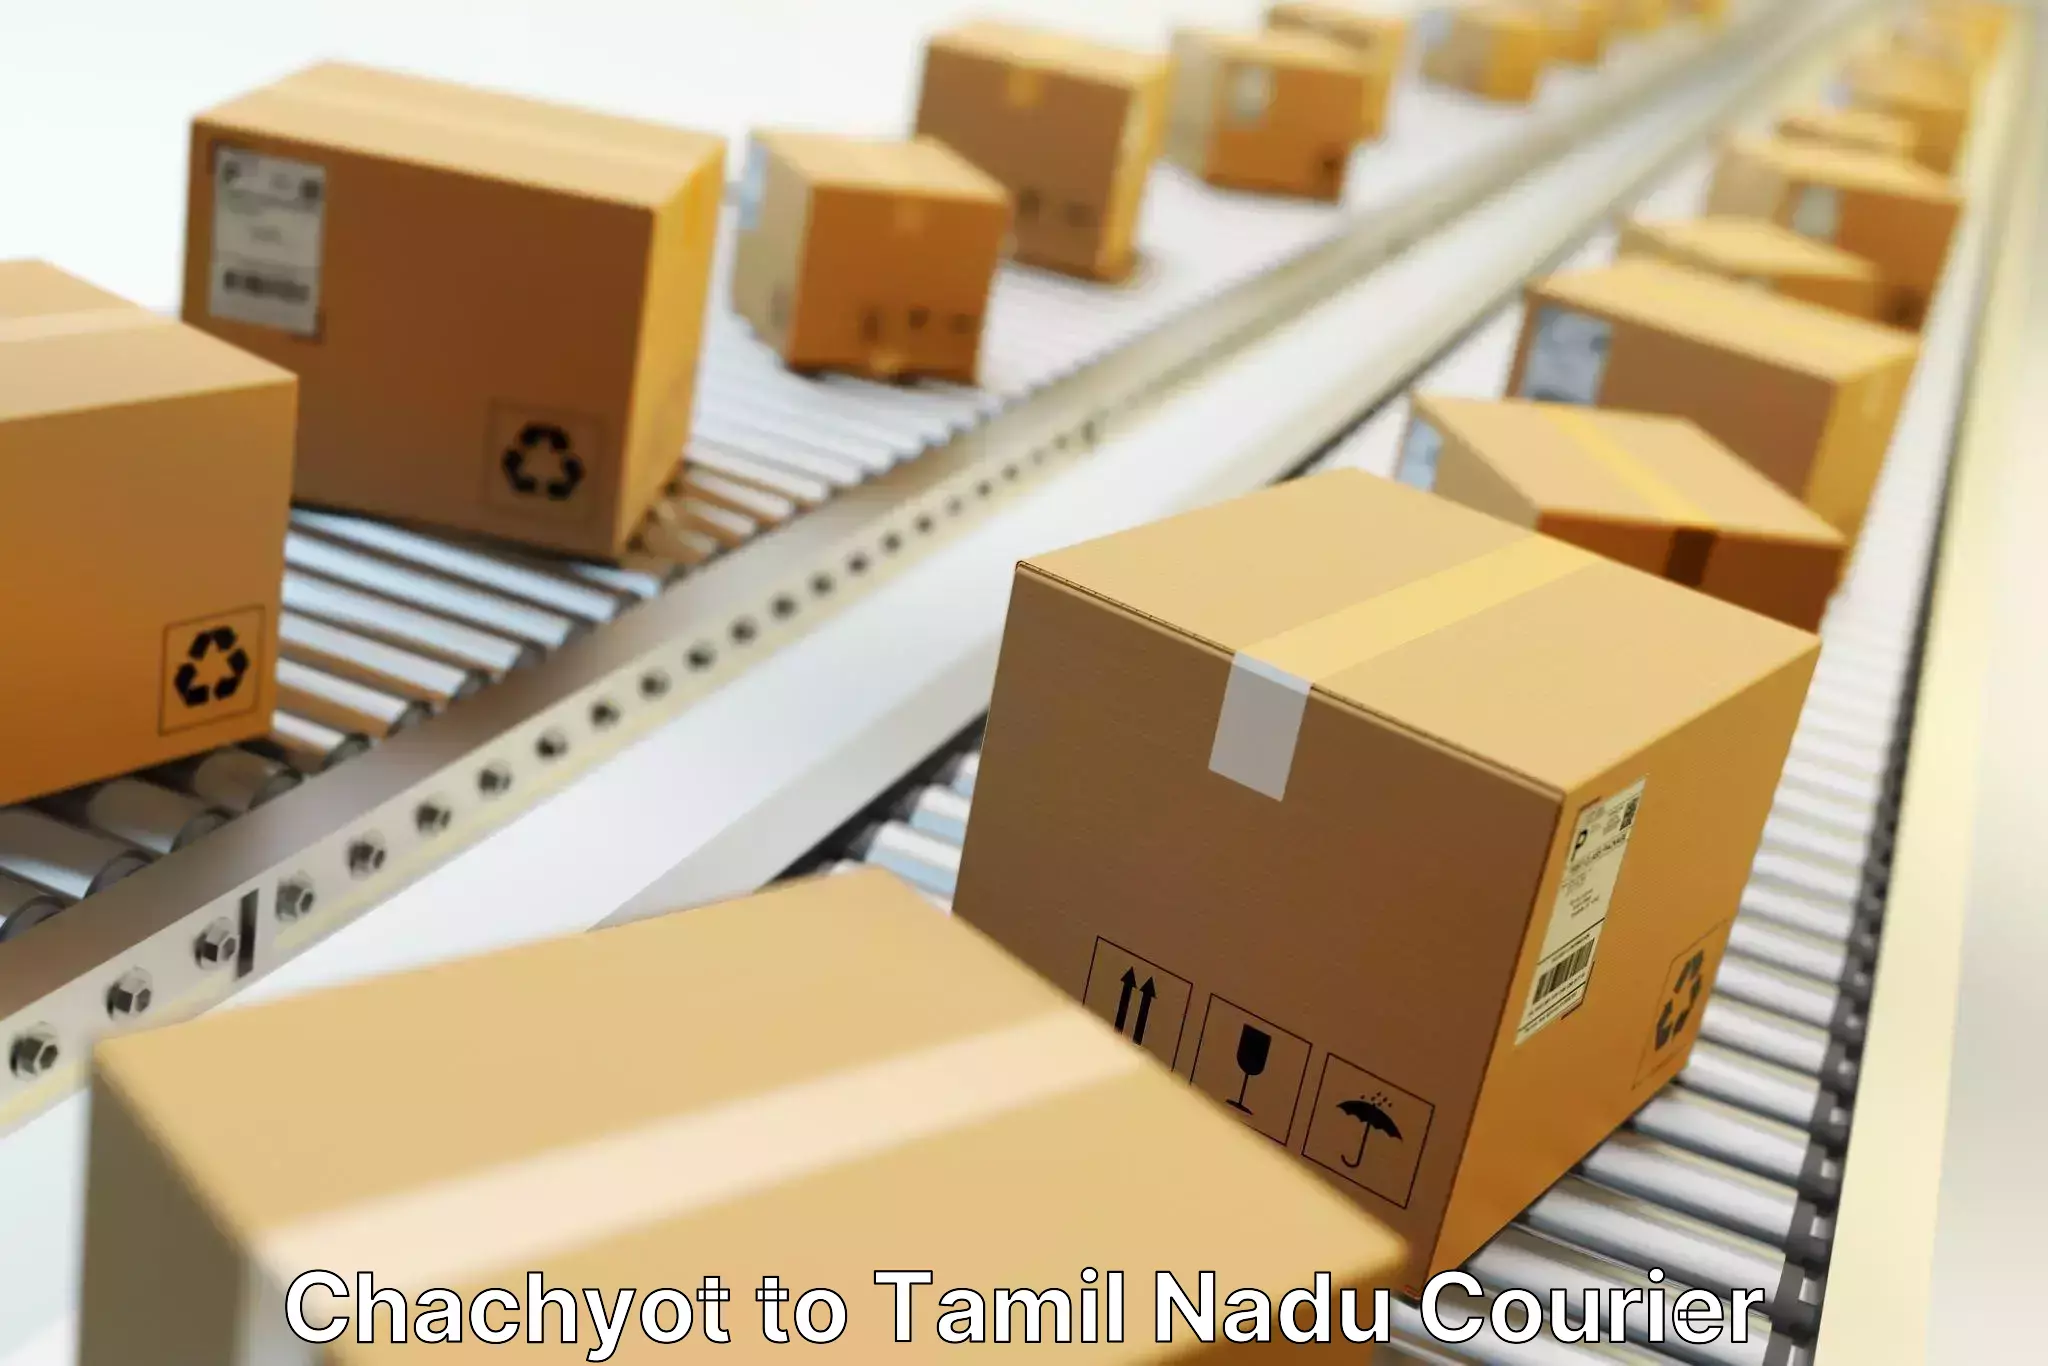 Courier tracking online Chachyot to Chennai